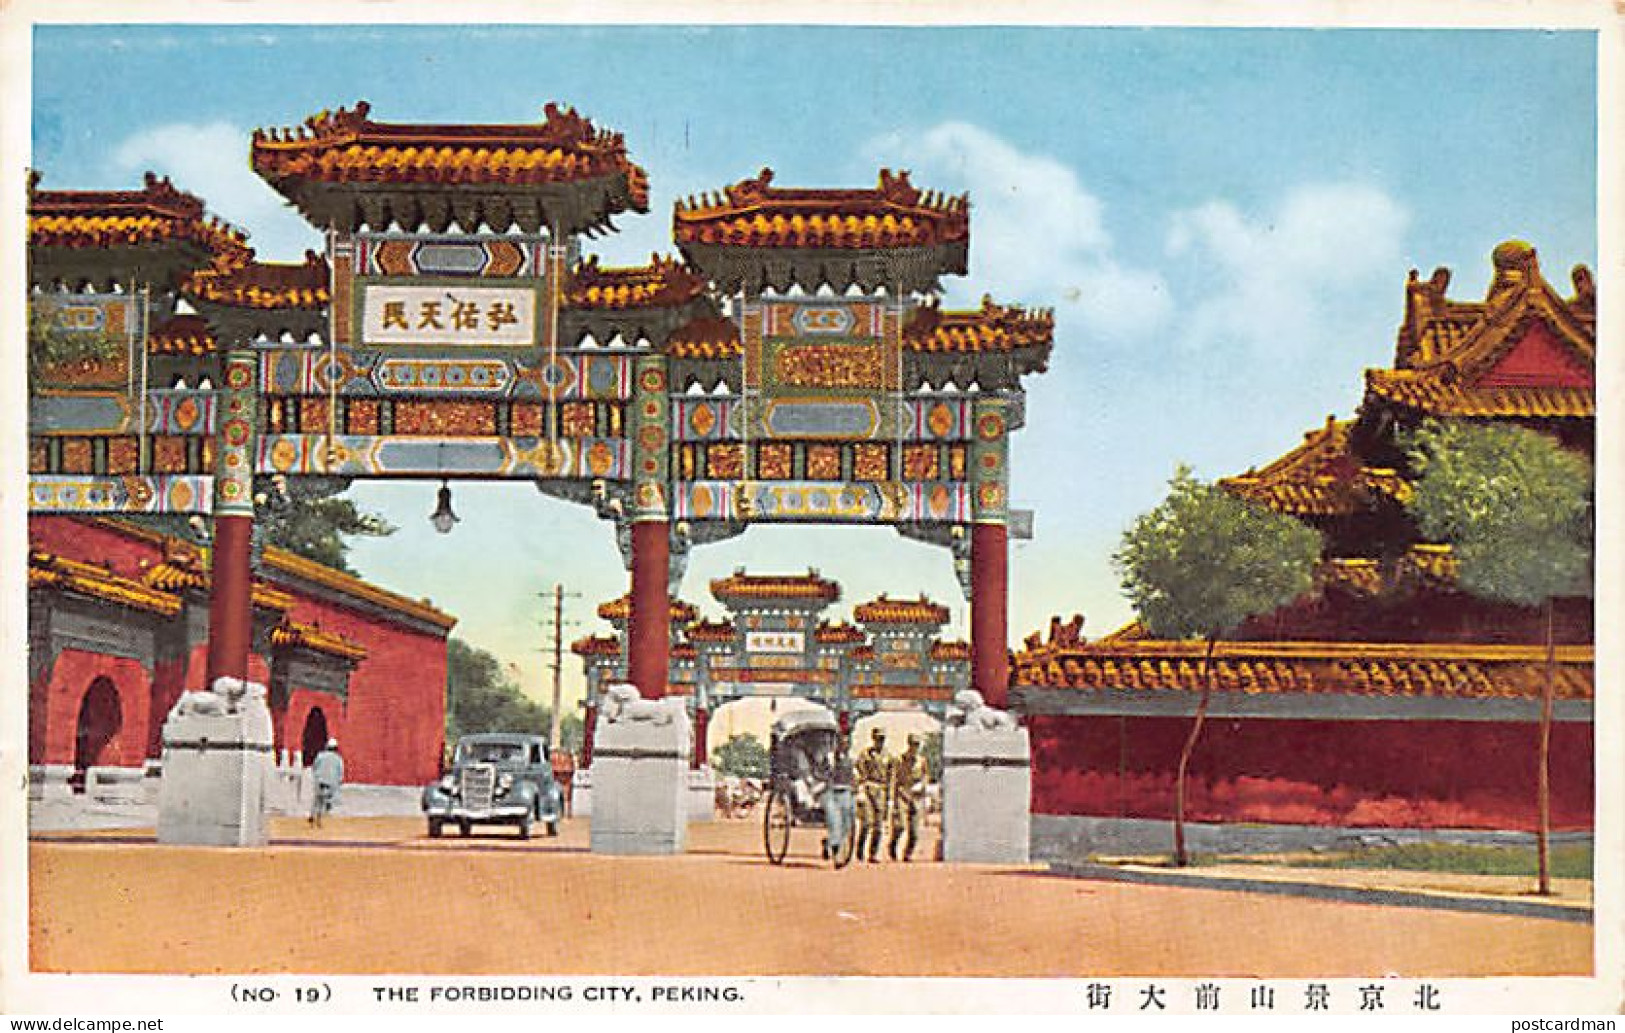 China - BEIJING - The Forbidden City - Publ. Unknown 19 - China